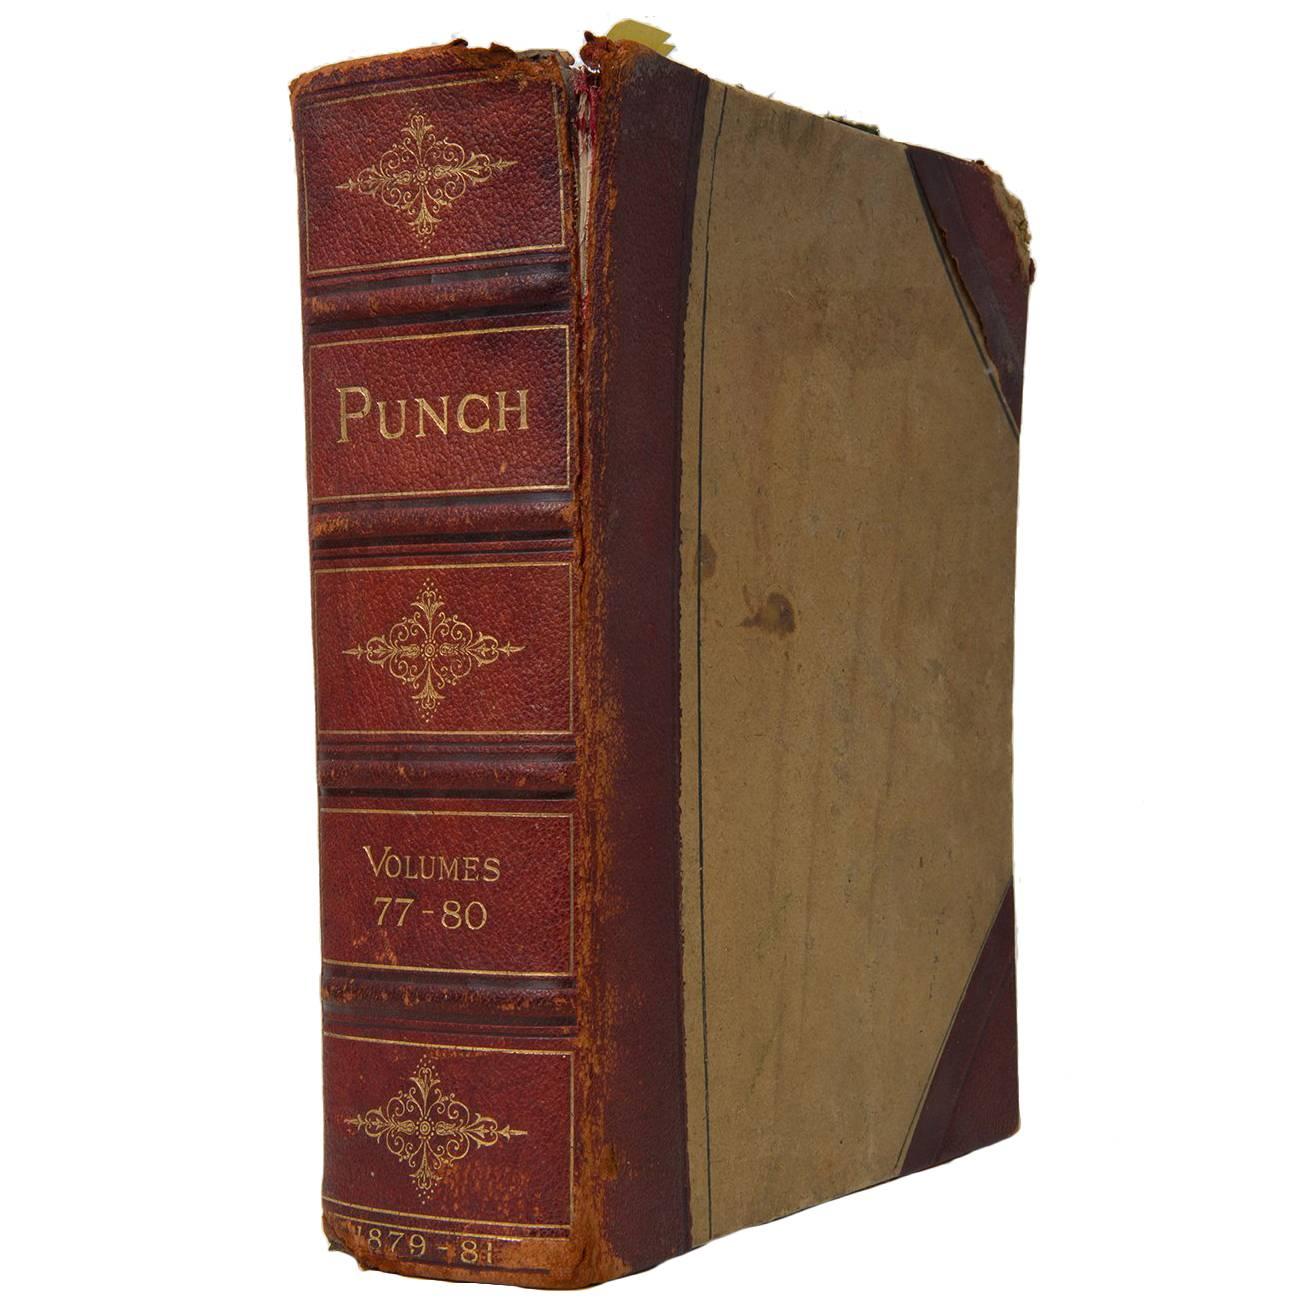 Old English book PUNCH